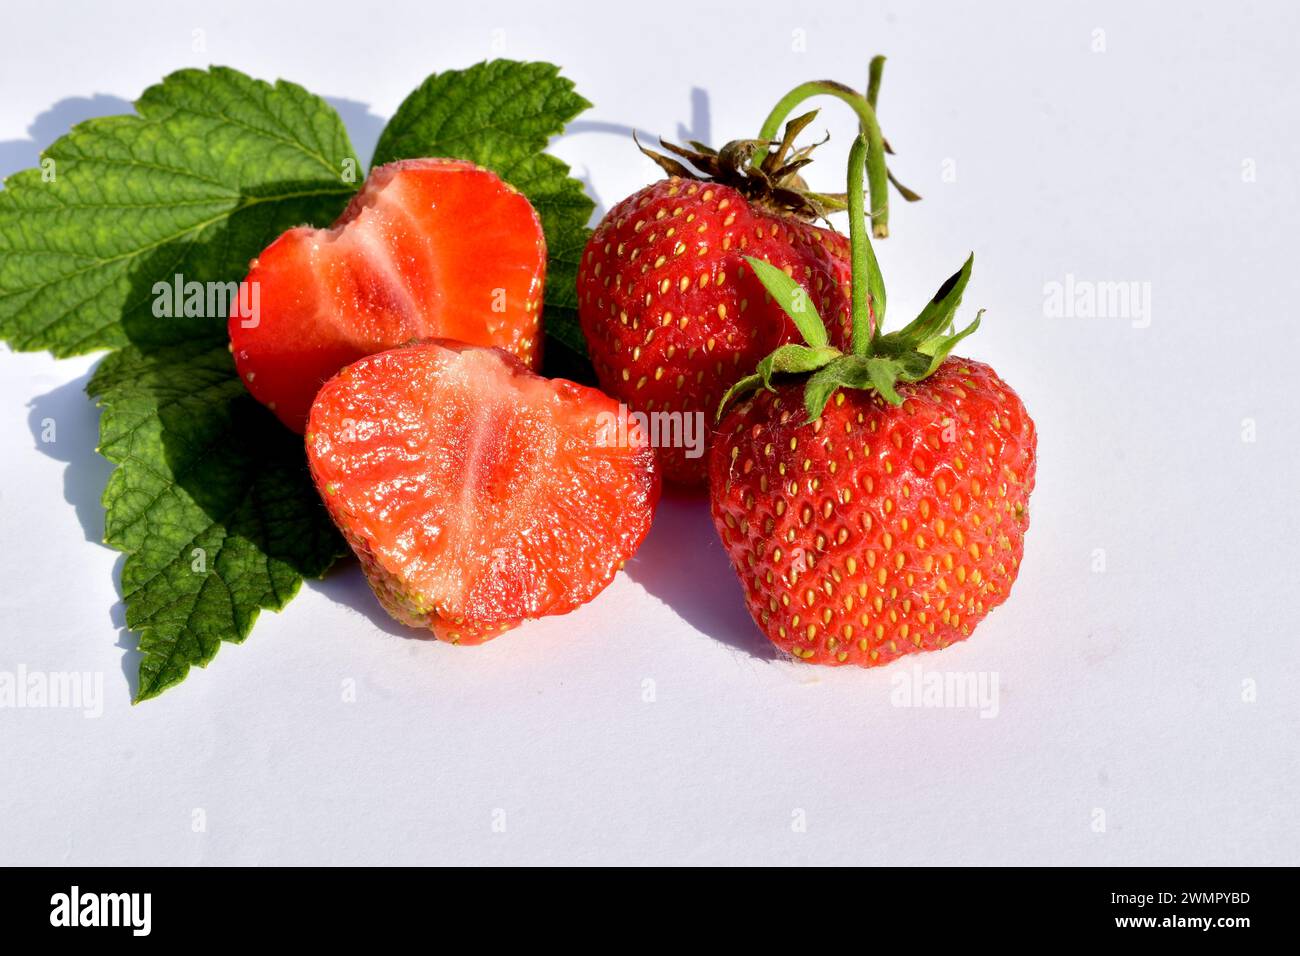 On a white table are several ripe juicy strawberries, one of which has been cut. Stock Photo